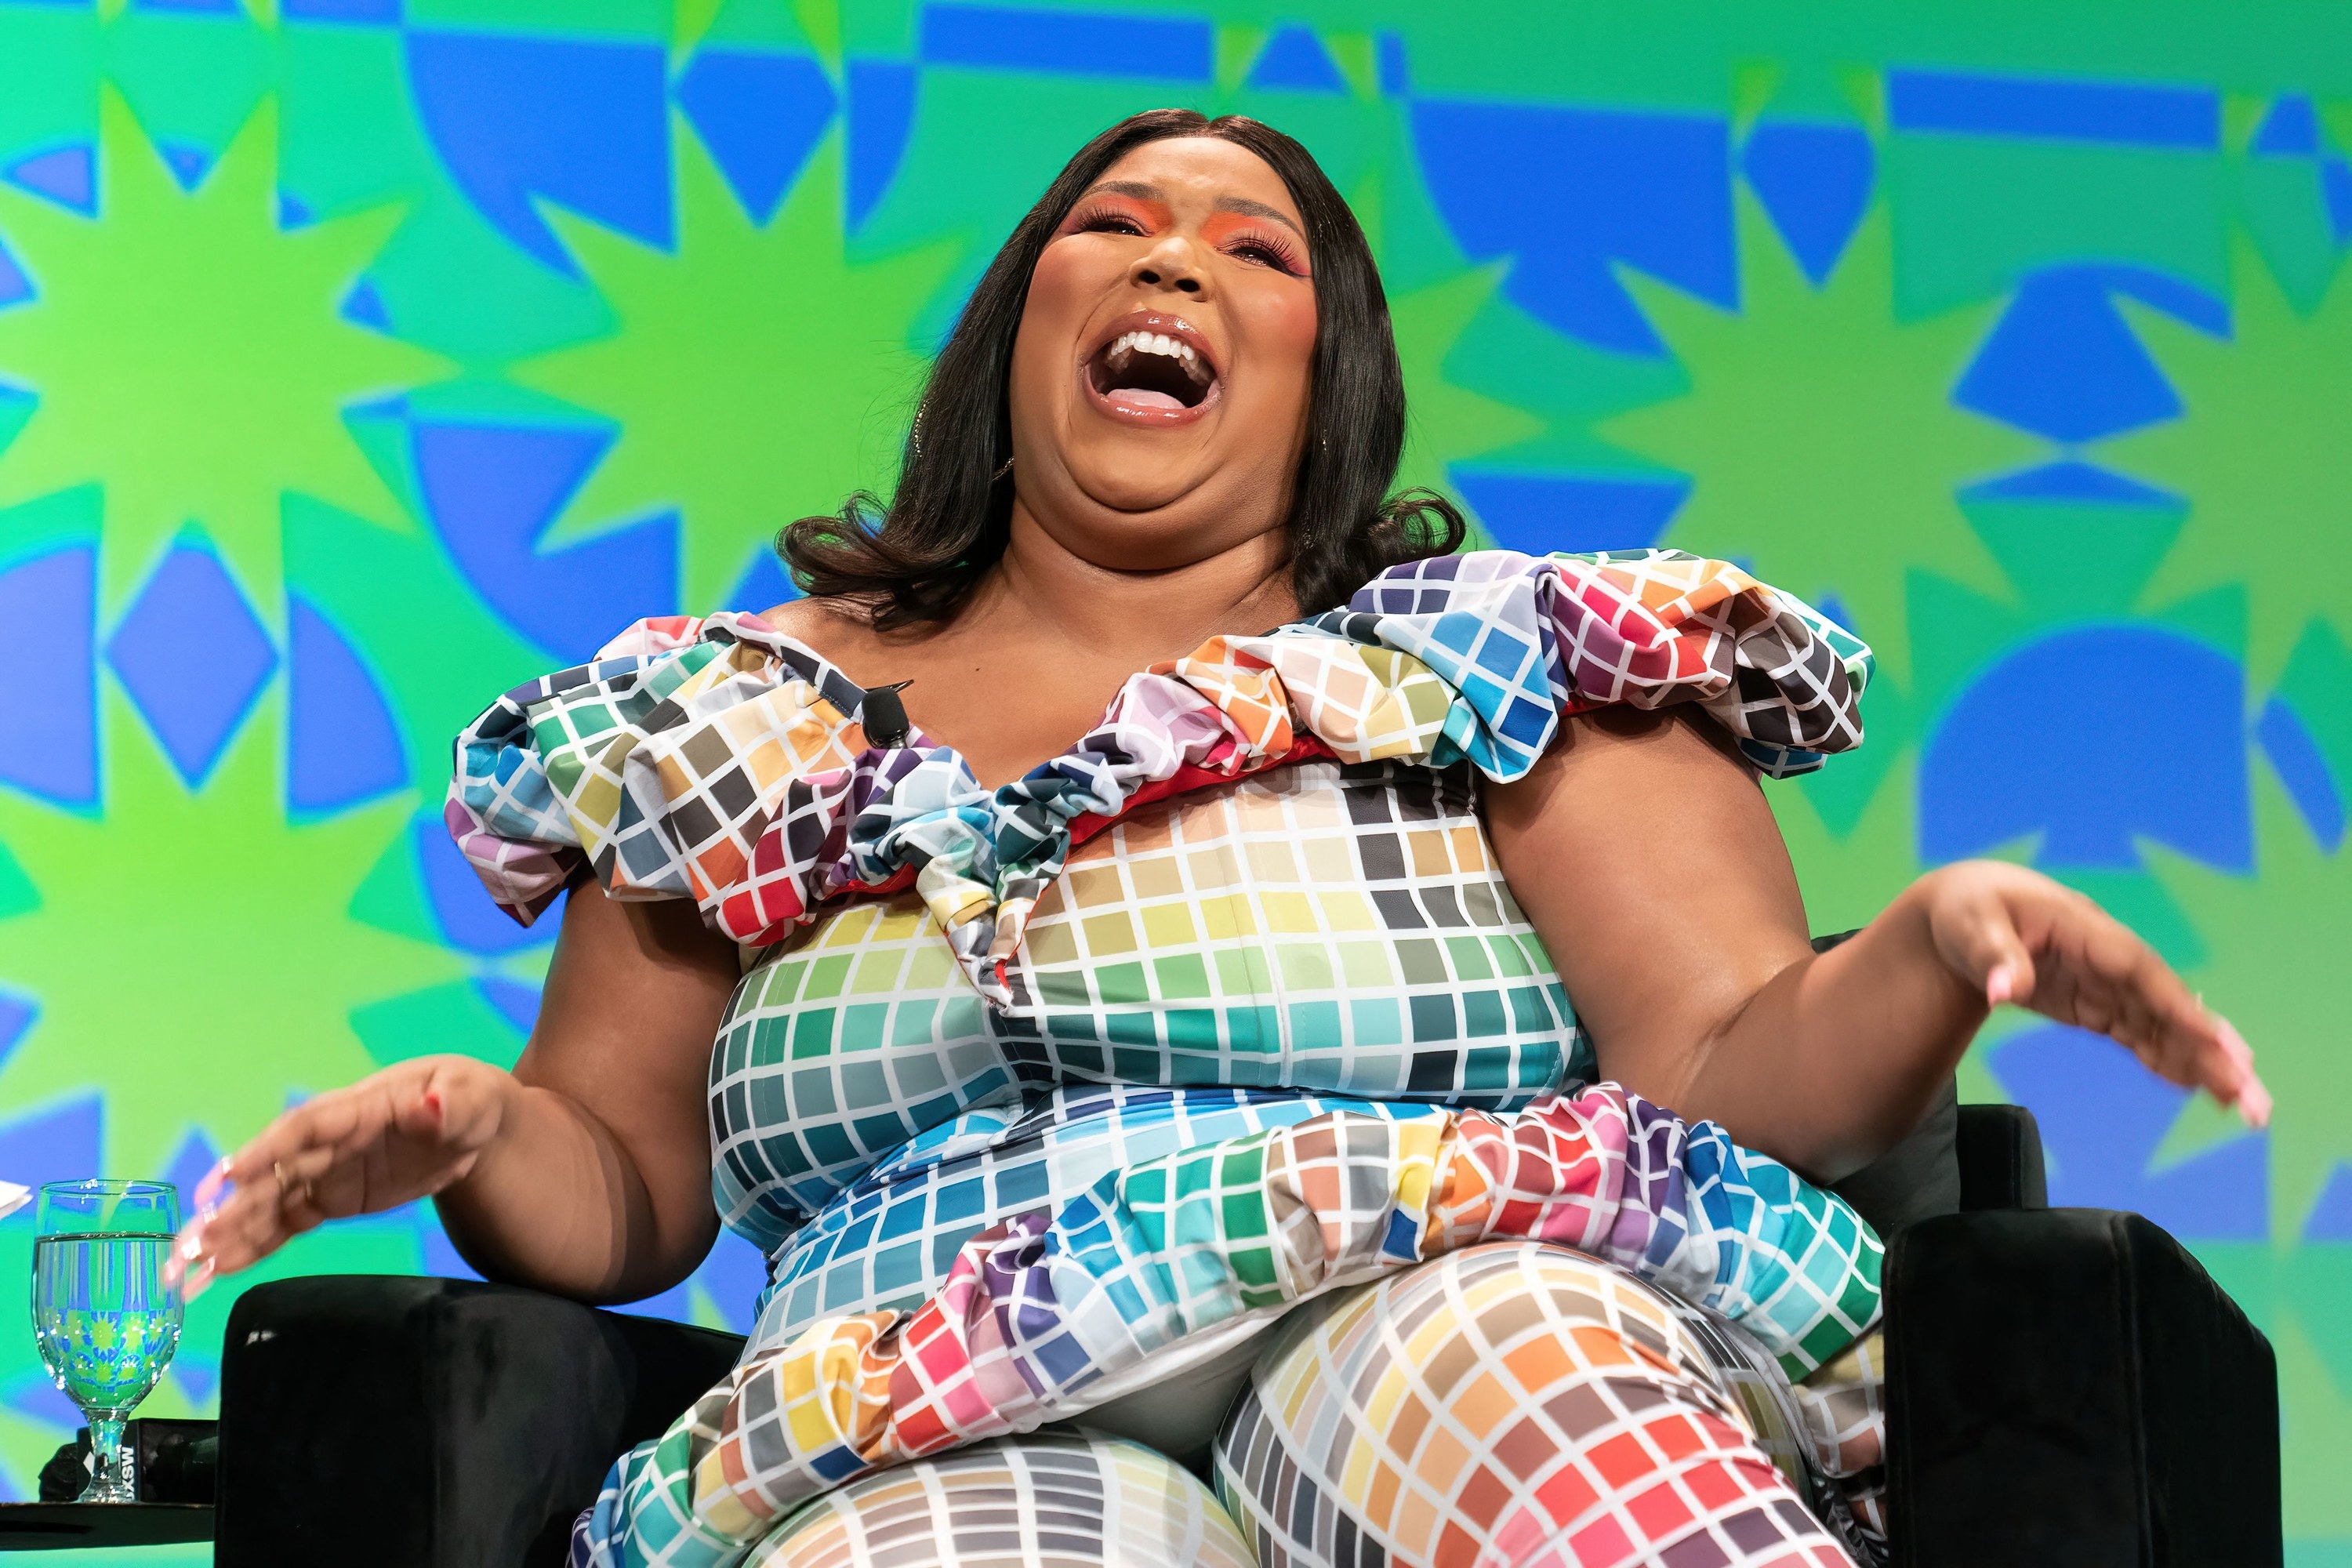 Lizzo laughs while sitting in a chair